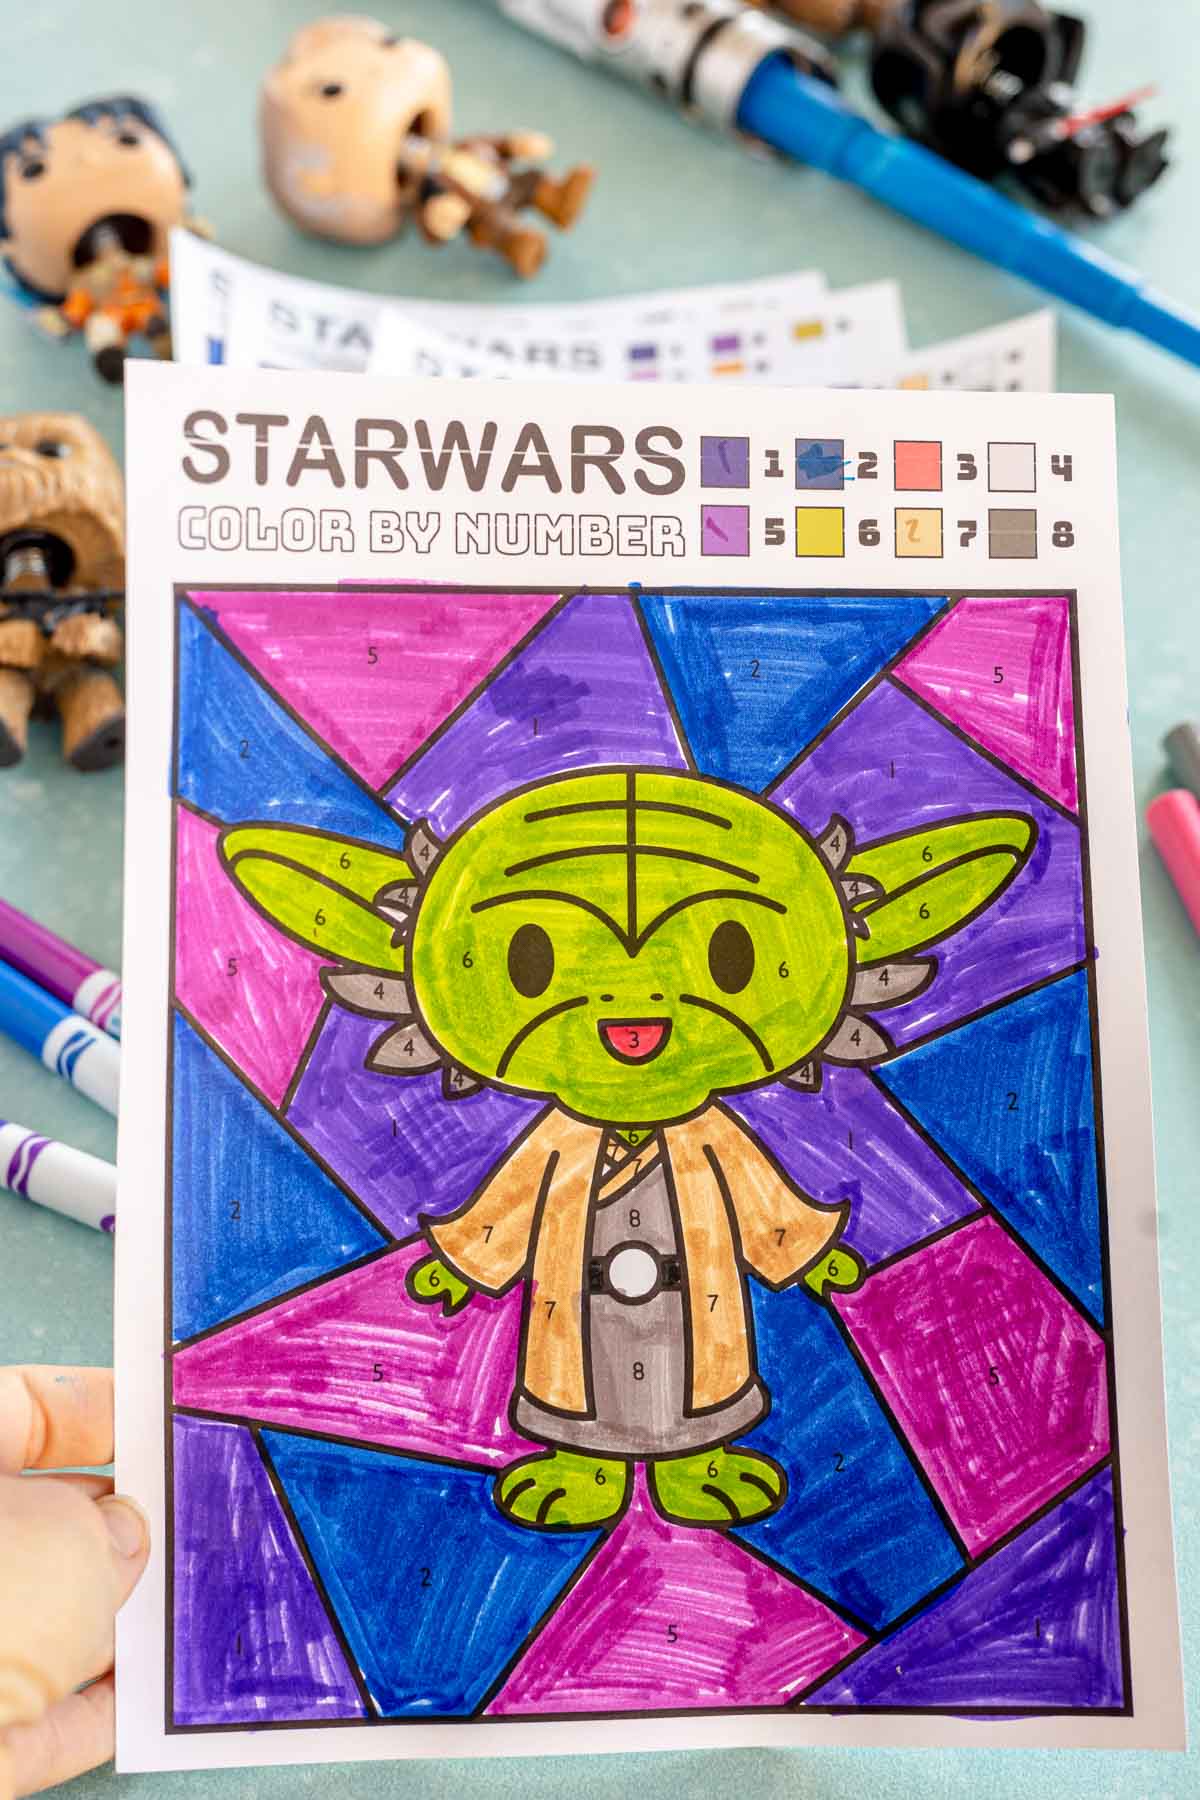 Yoda Star Wars color by number page that's colored in